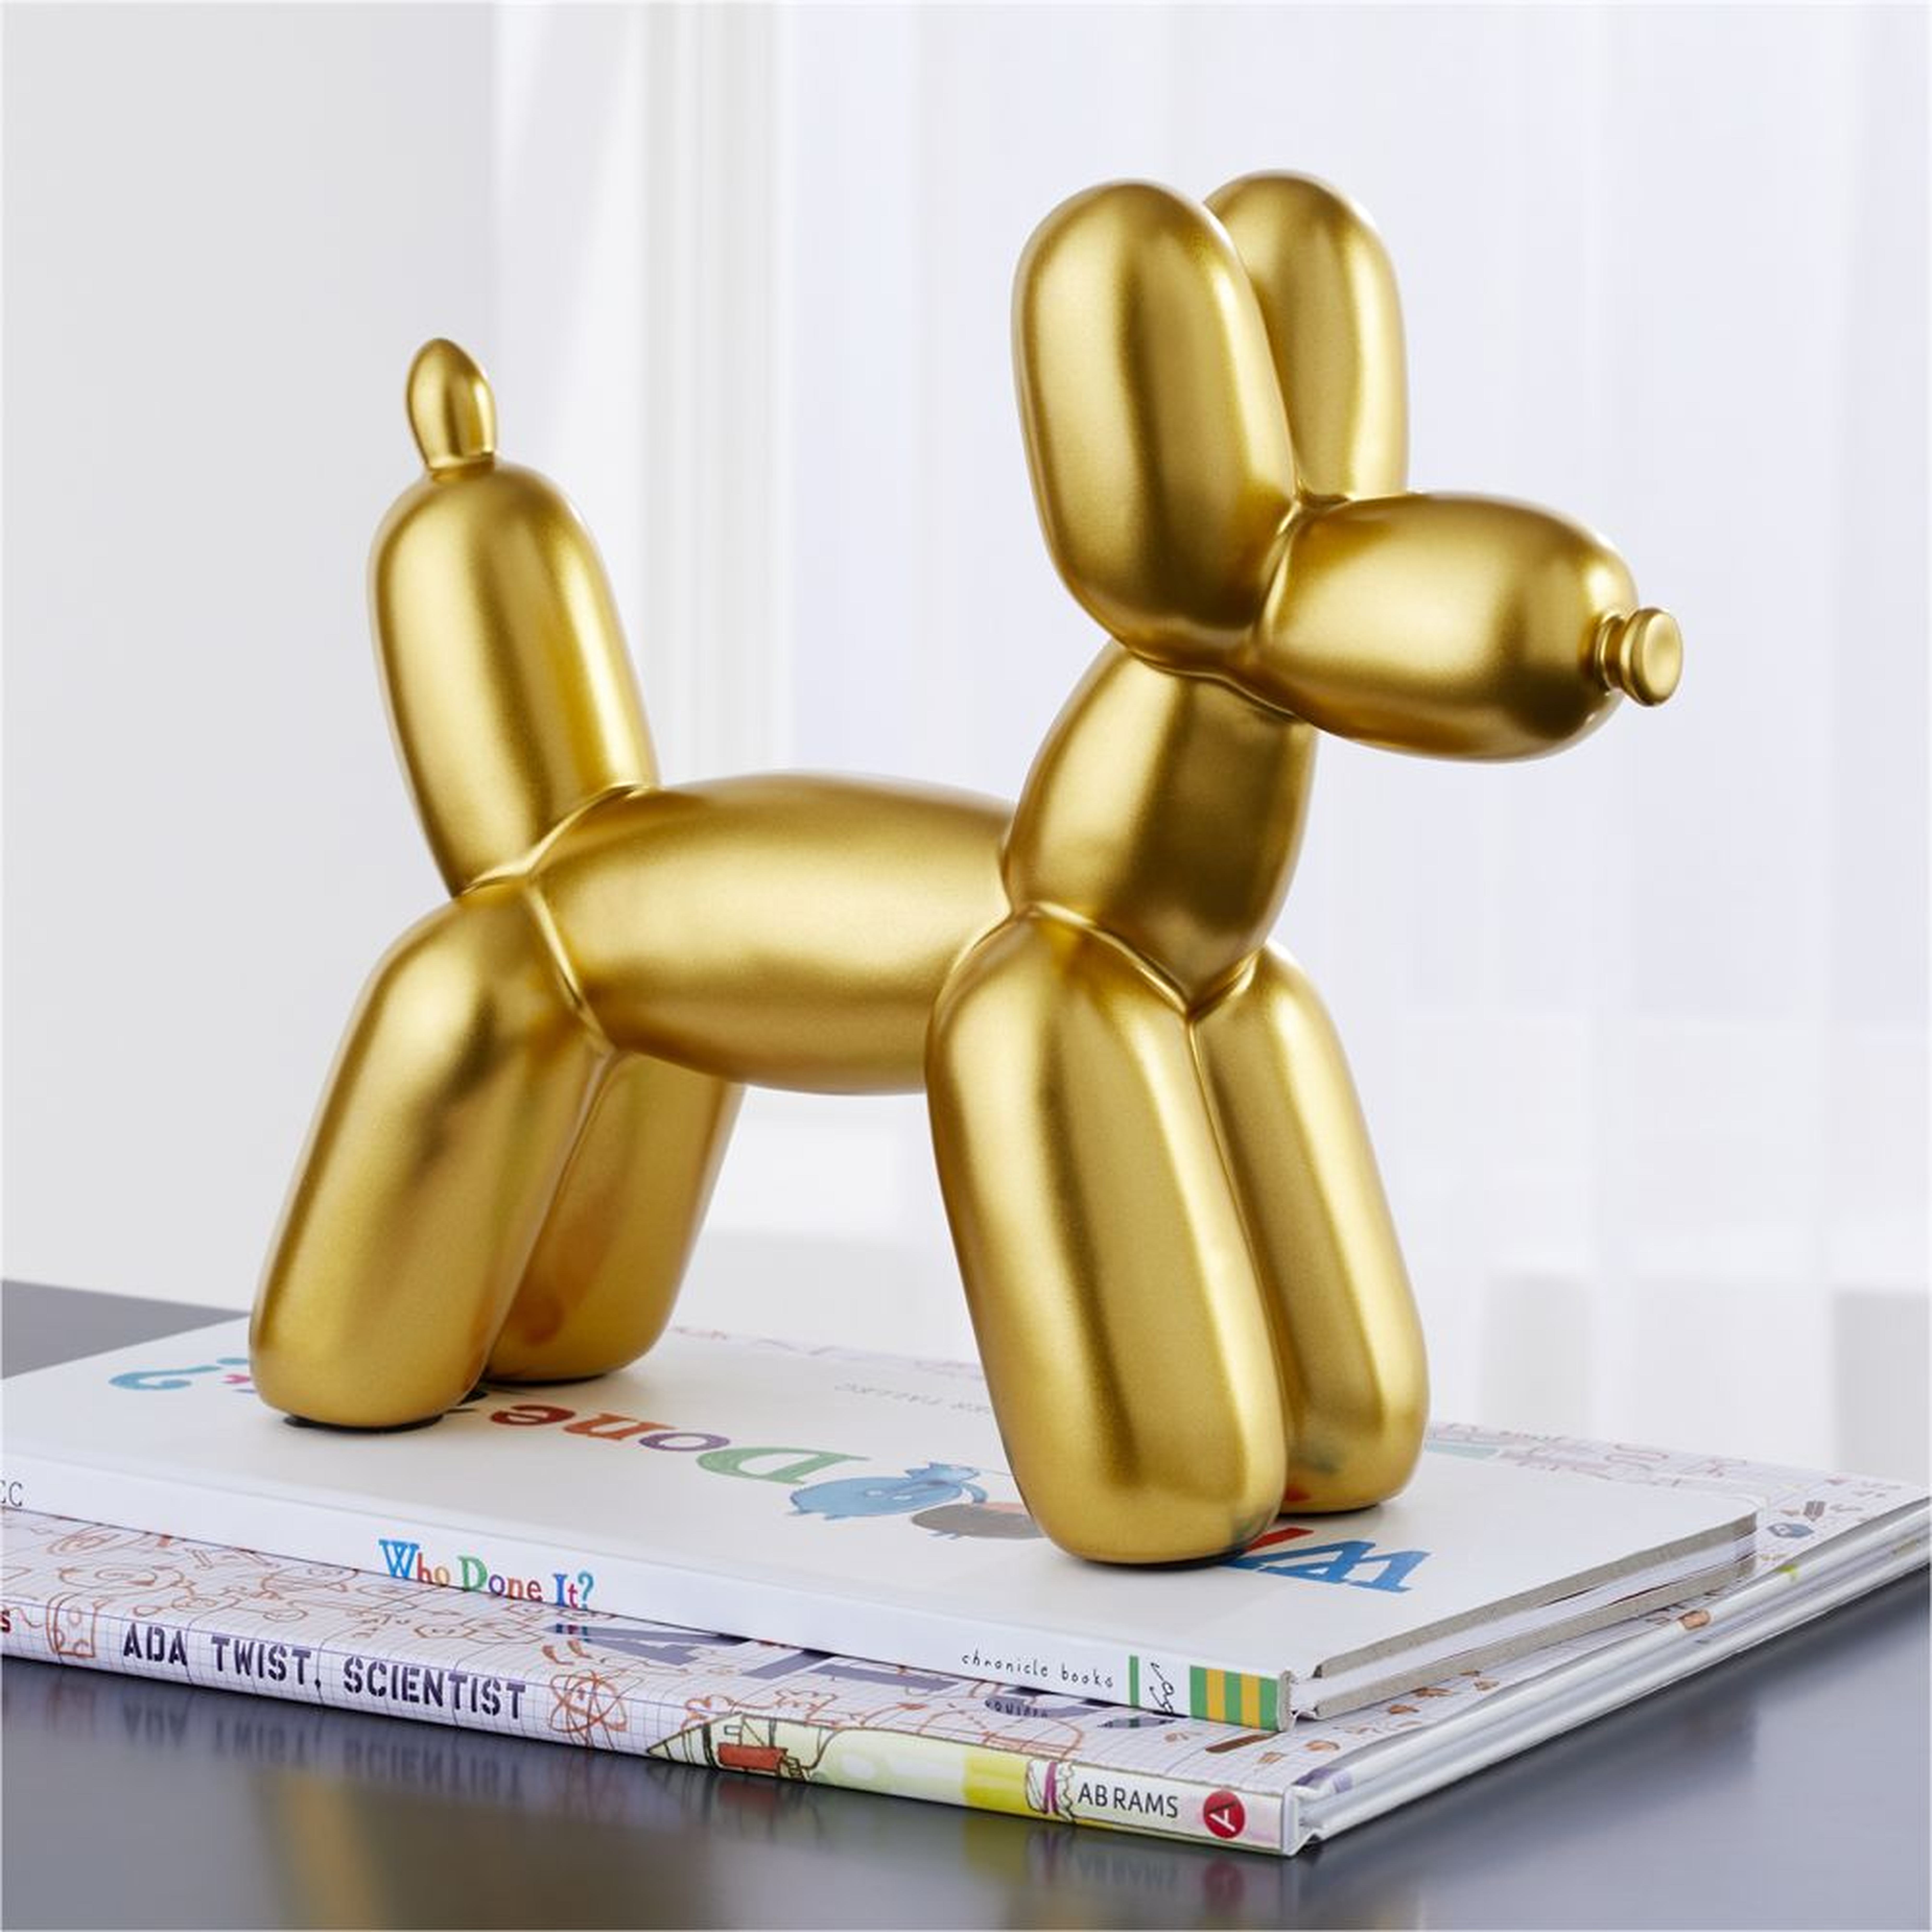 Gold Dog Balloon Animal Bookend - Crate and Barrel